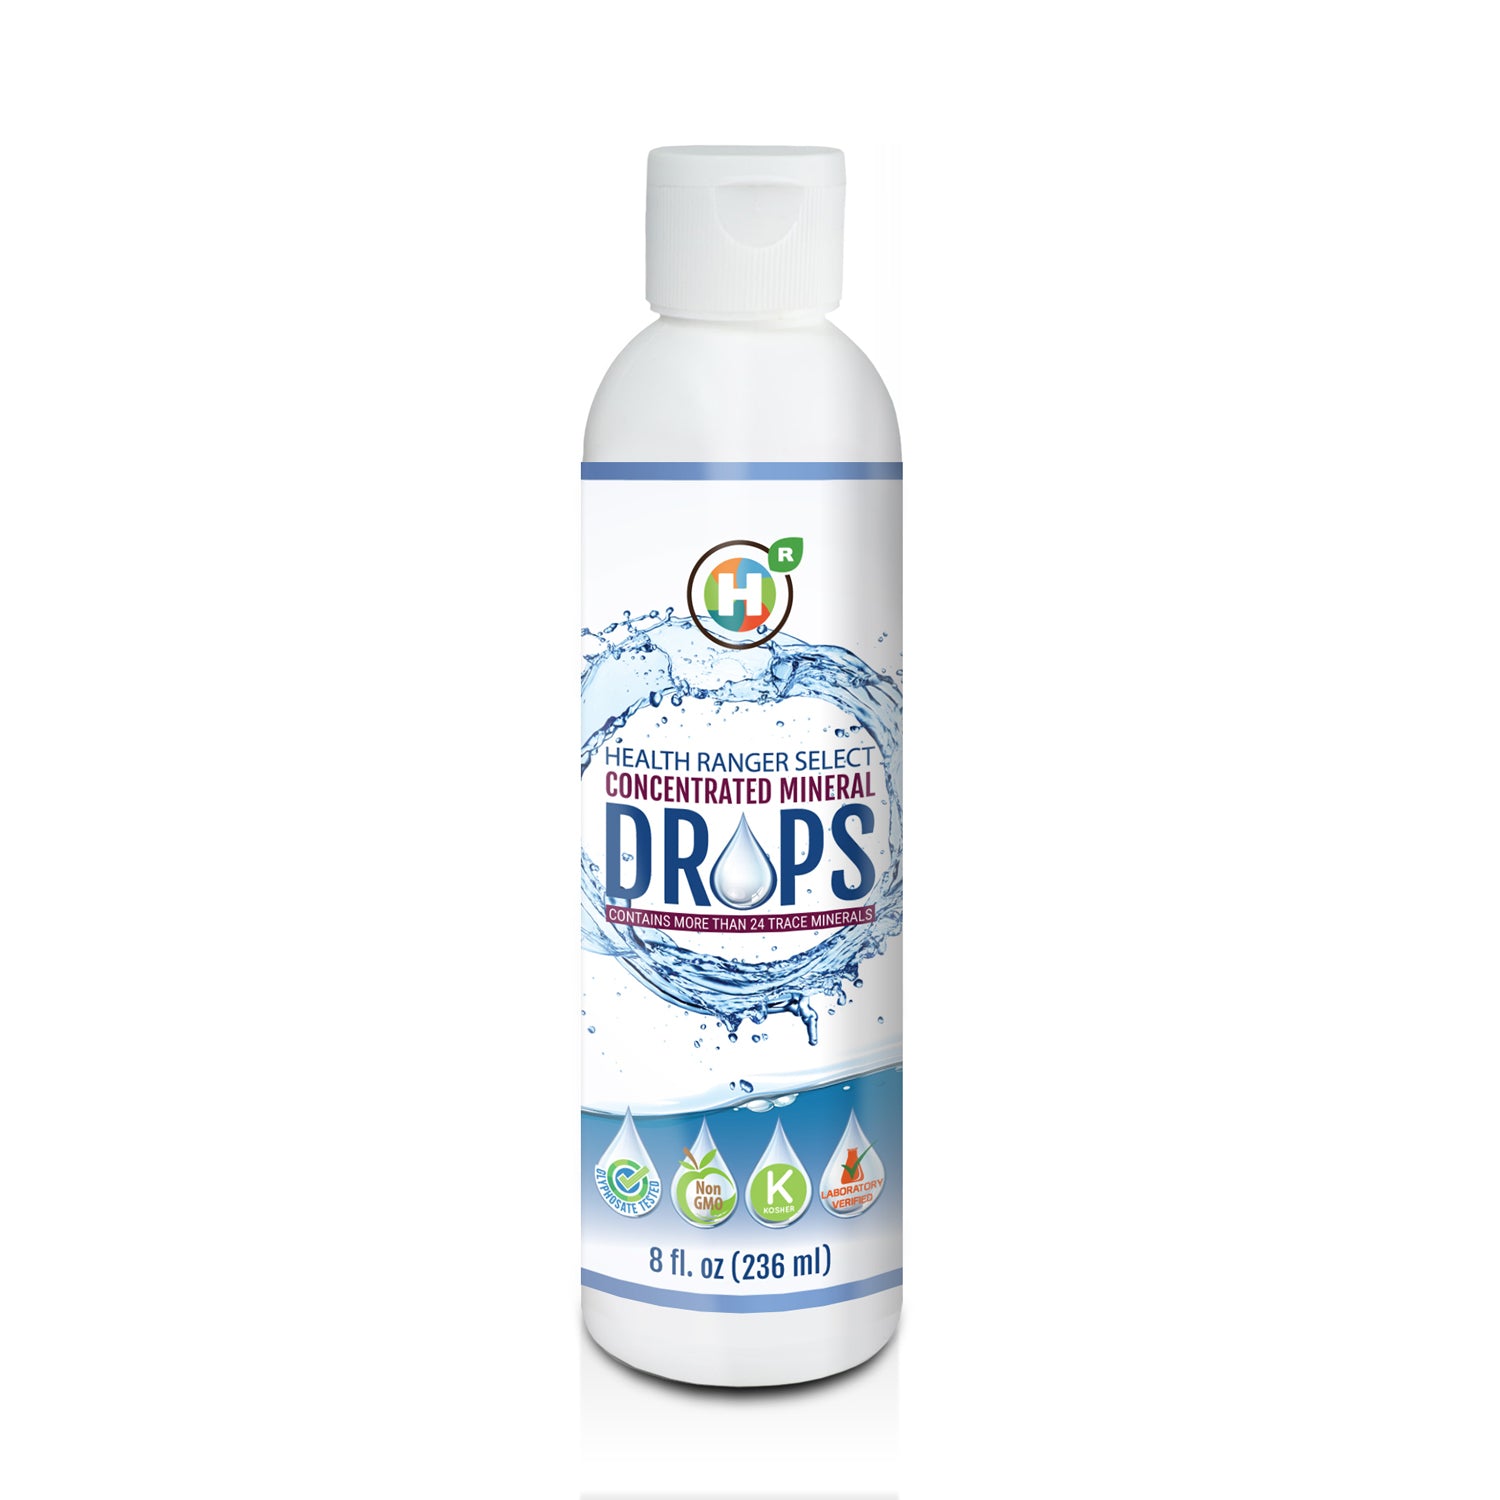 Concentrated Mineral Drops 8 fl oz (236ml)